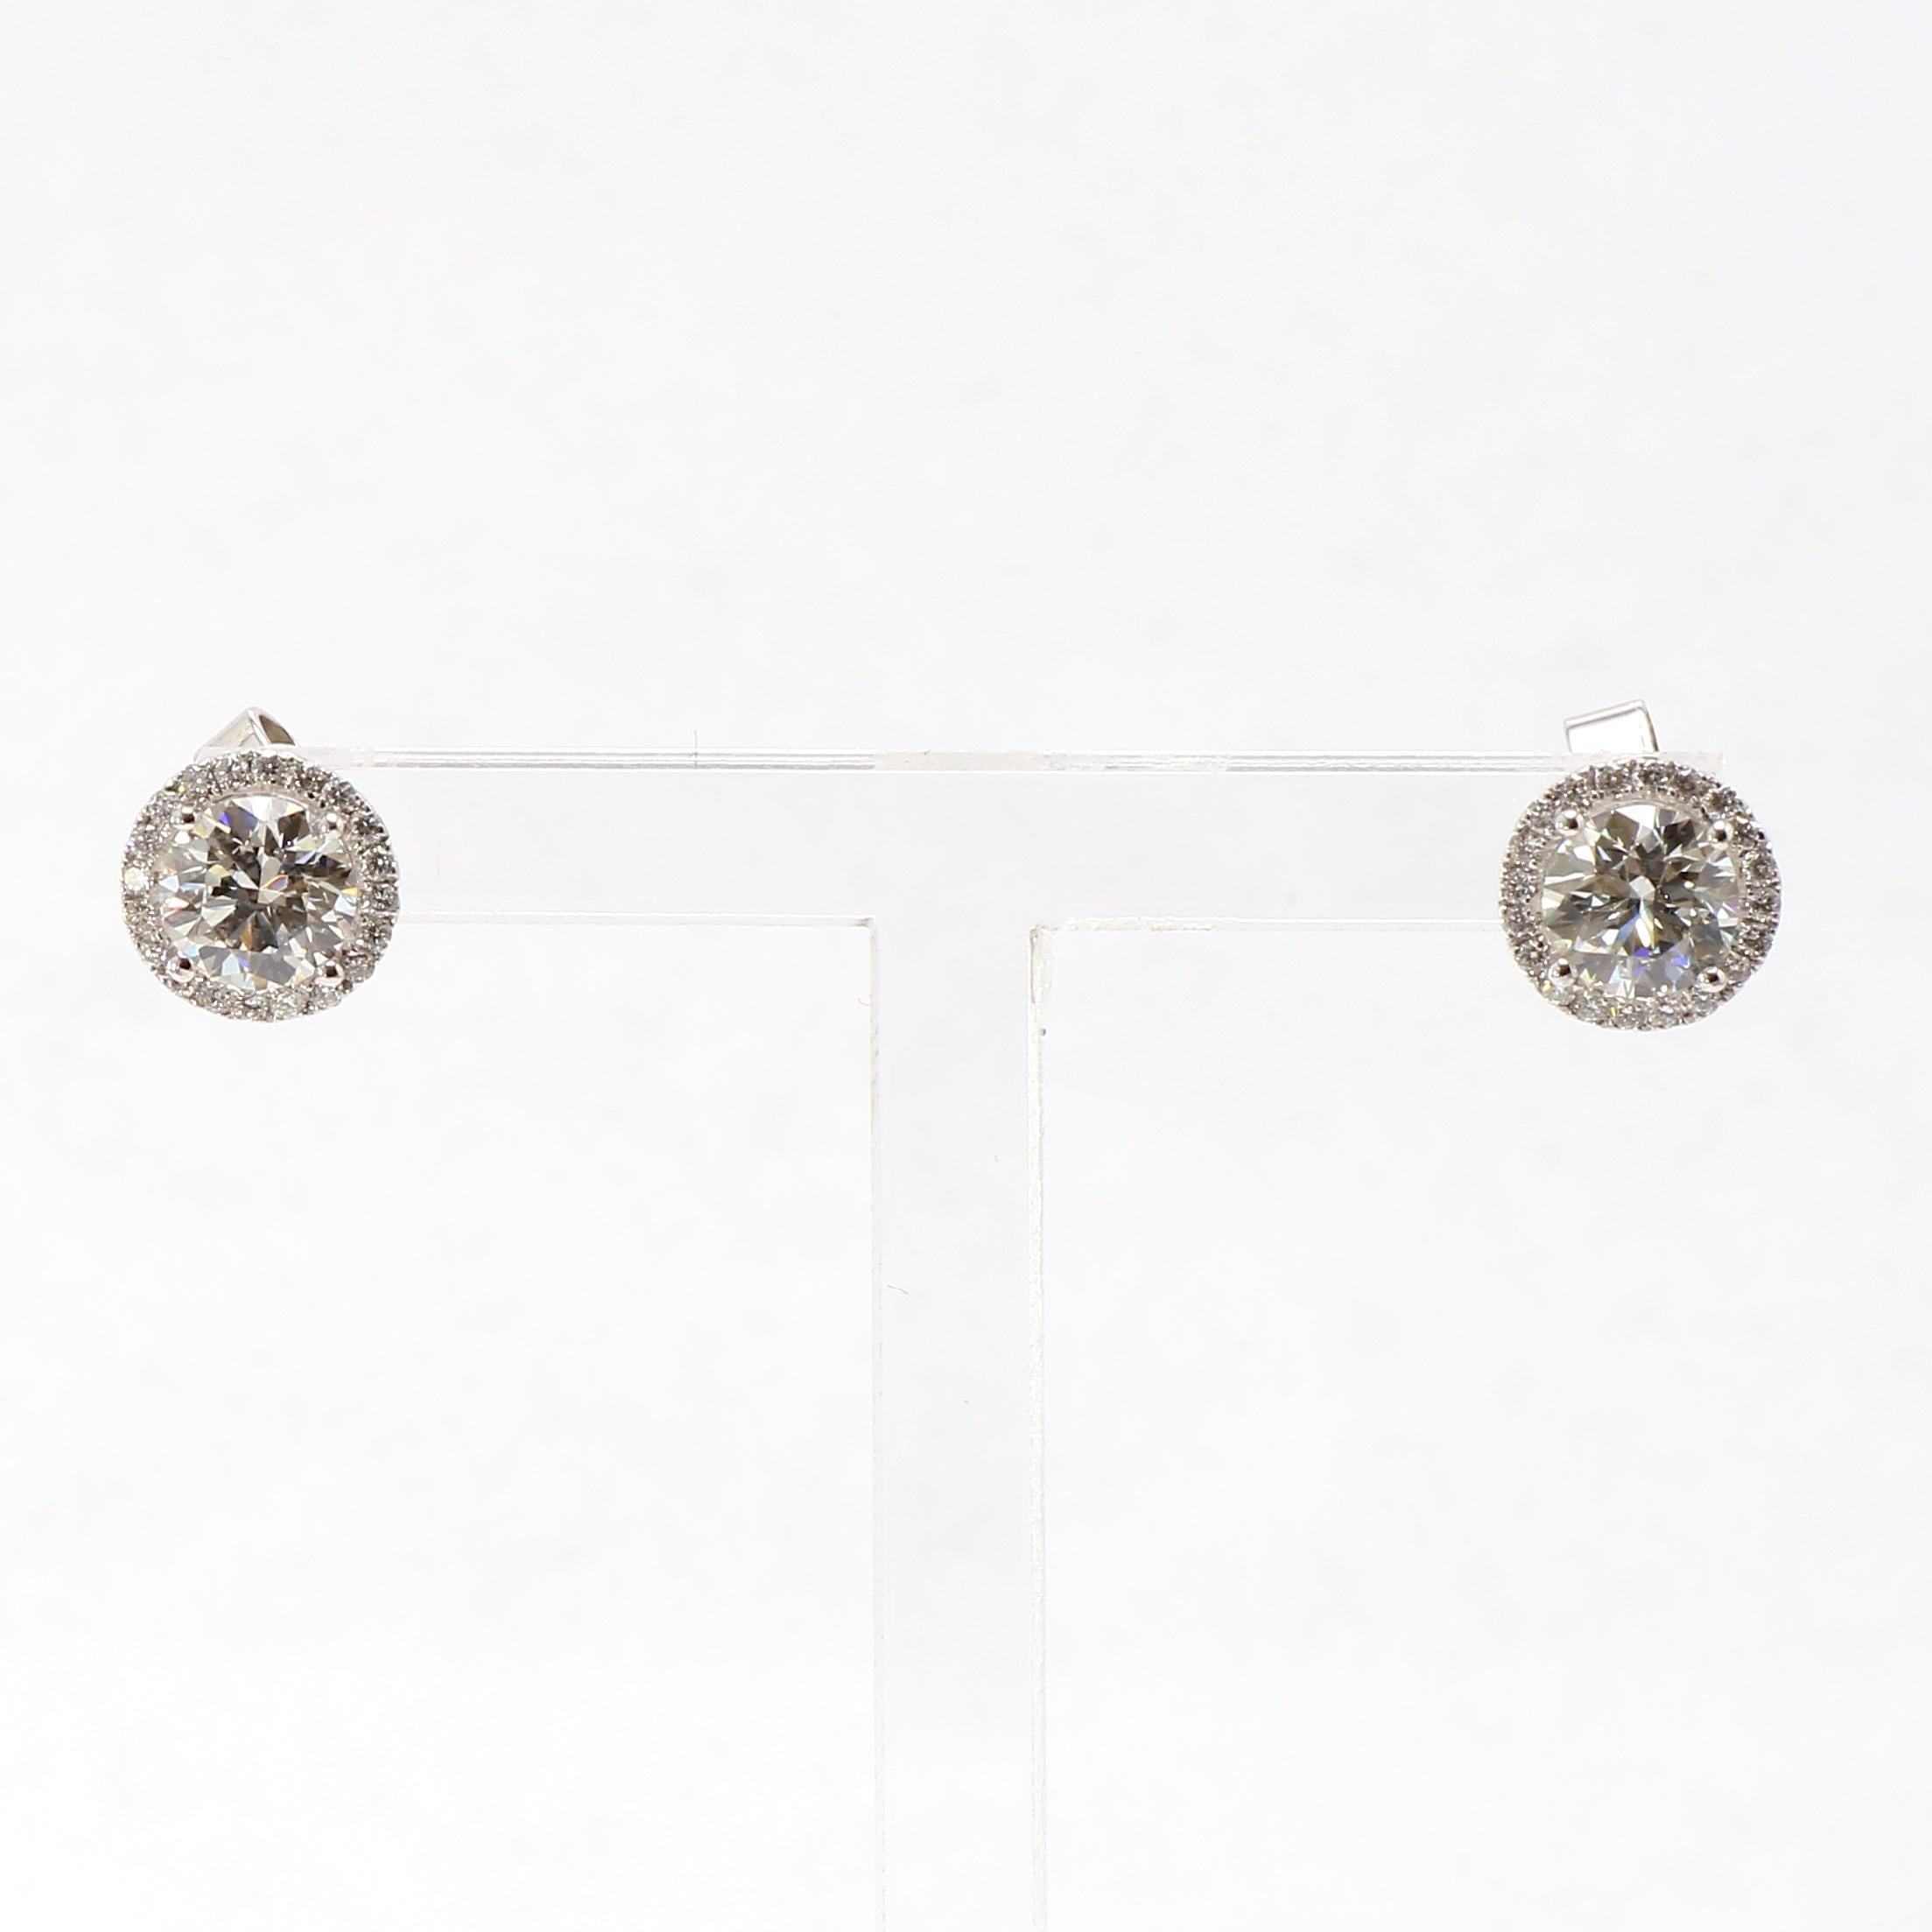 Beautifully handcrafted pair of Diamond Stud Earrings, Halo Style set in 18K White Gold
Round Brilliant Cut White Diamonds totaling 1.41ct H Color, VS1 Clarity, Cut and polish by Shimansy. and surrounded by Round Brilliant Cut White Diamonds